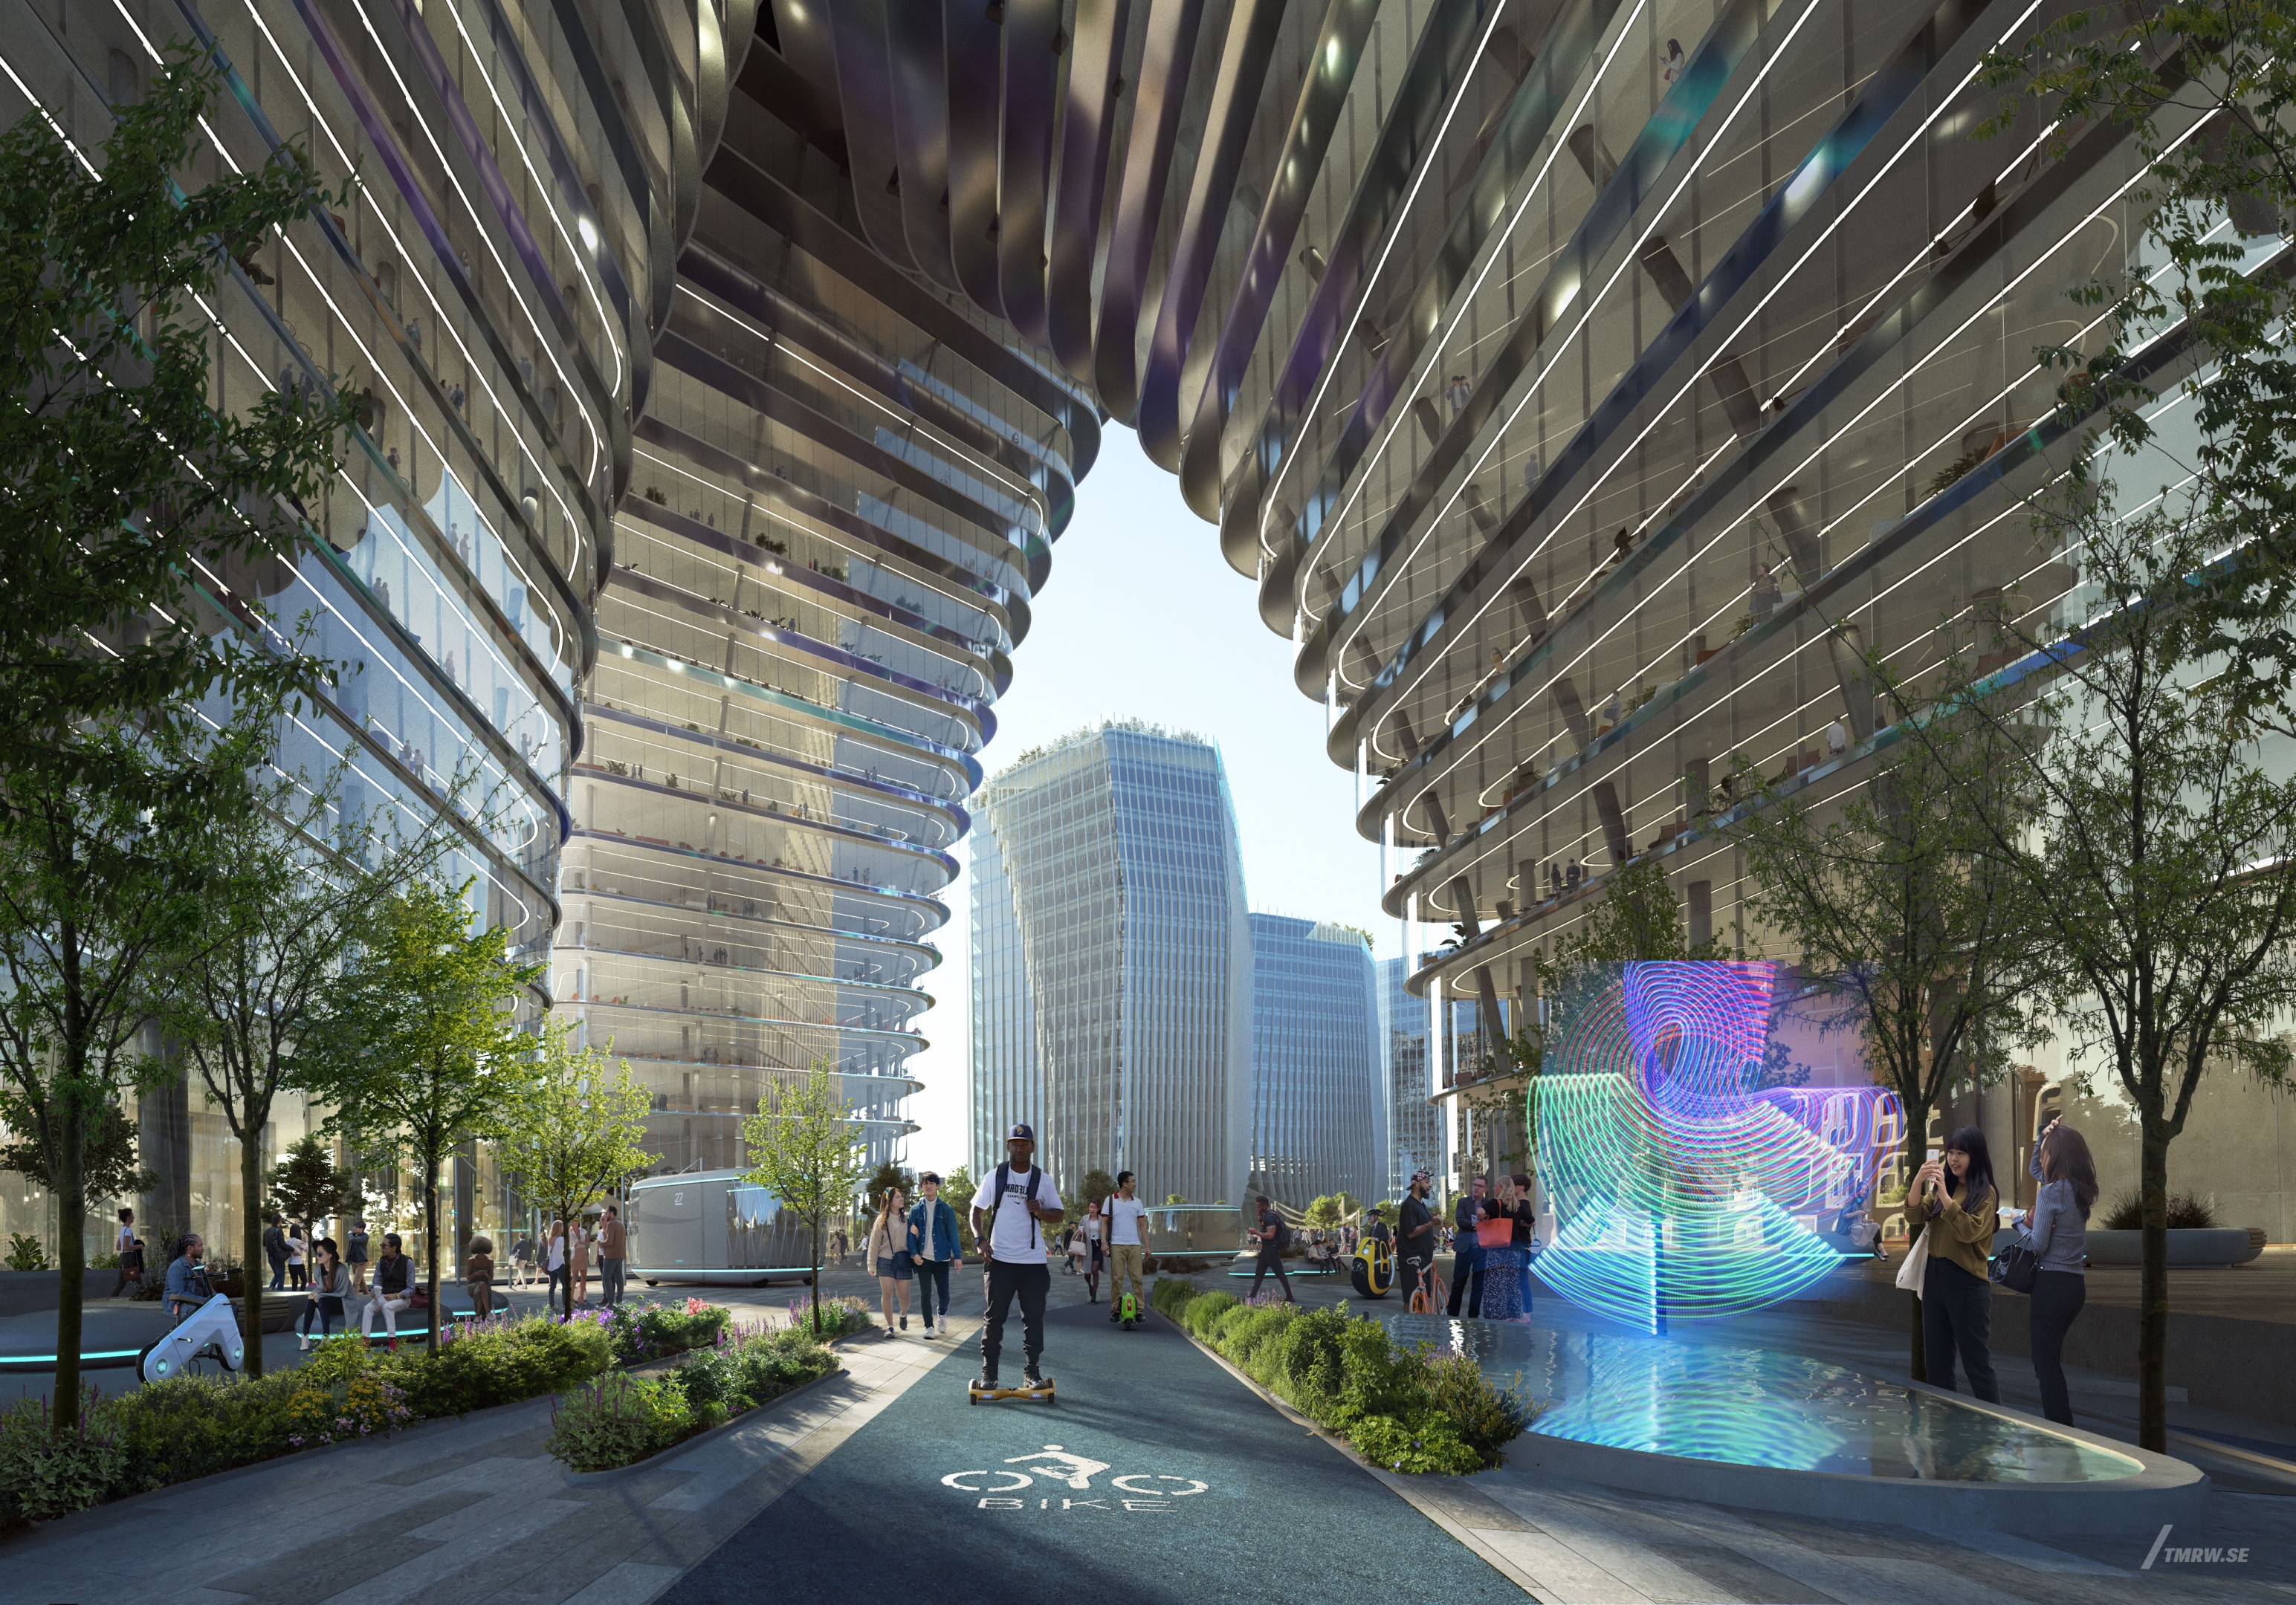 Architectural visualization of Tencent for KPF. An image of the exterior of a building with glass facade from street view. With a bike lane in the middle with people walking in daylight.